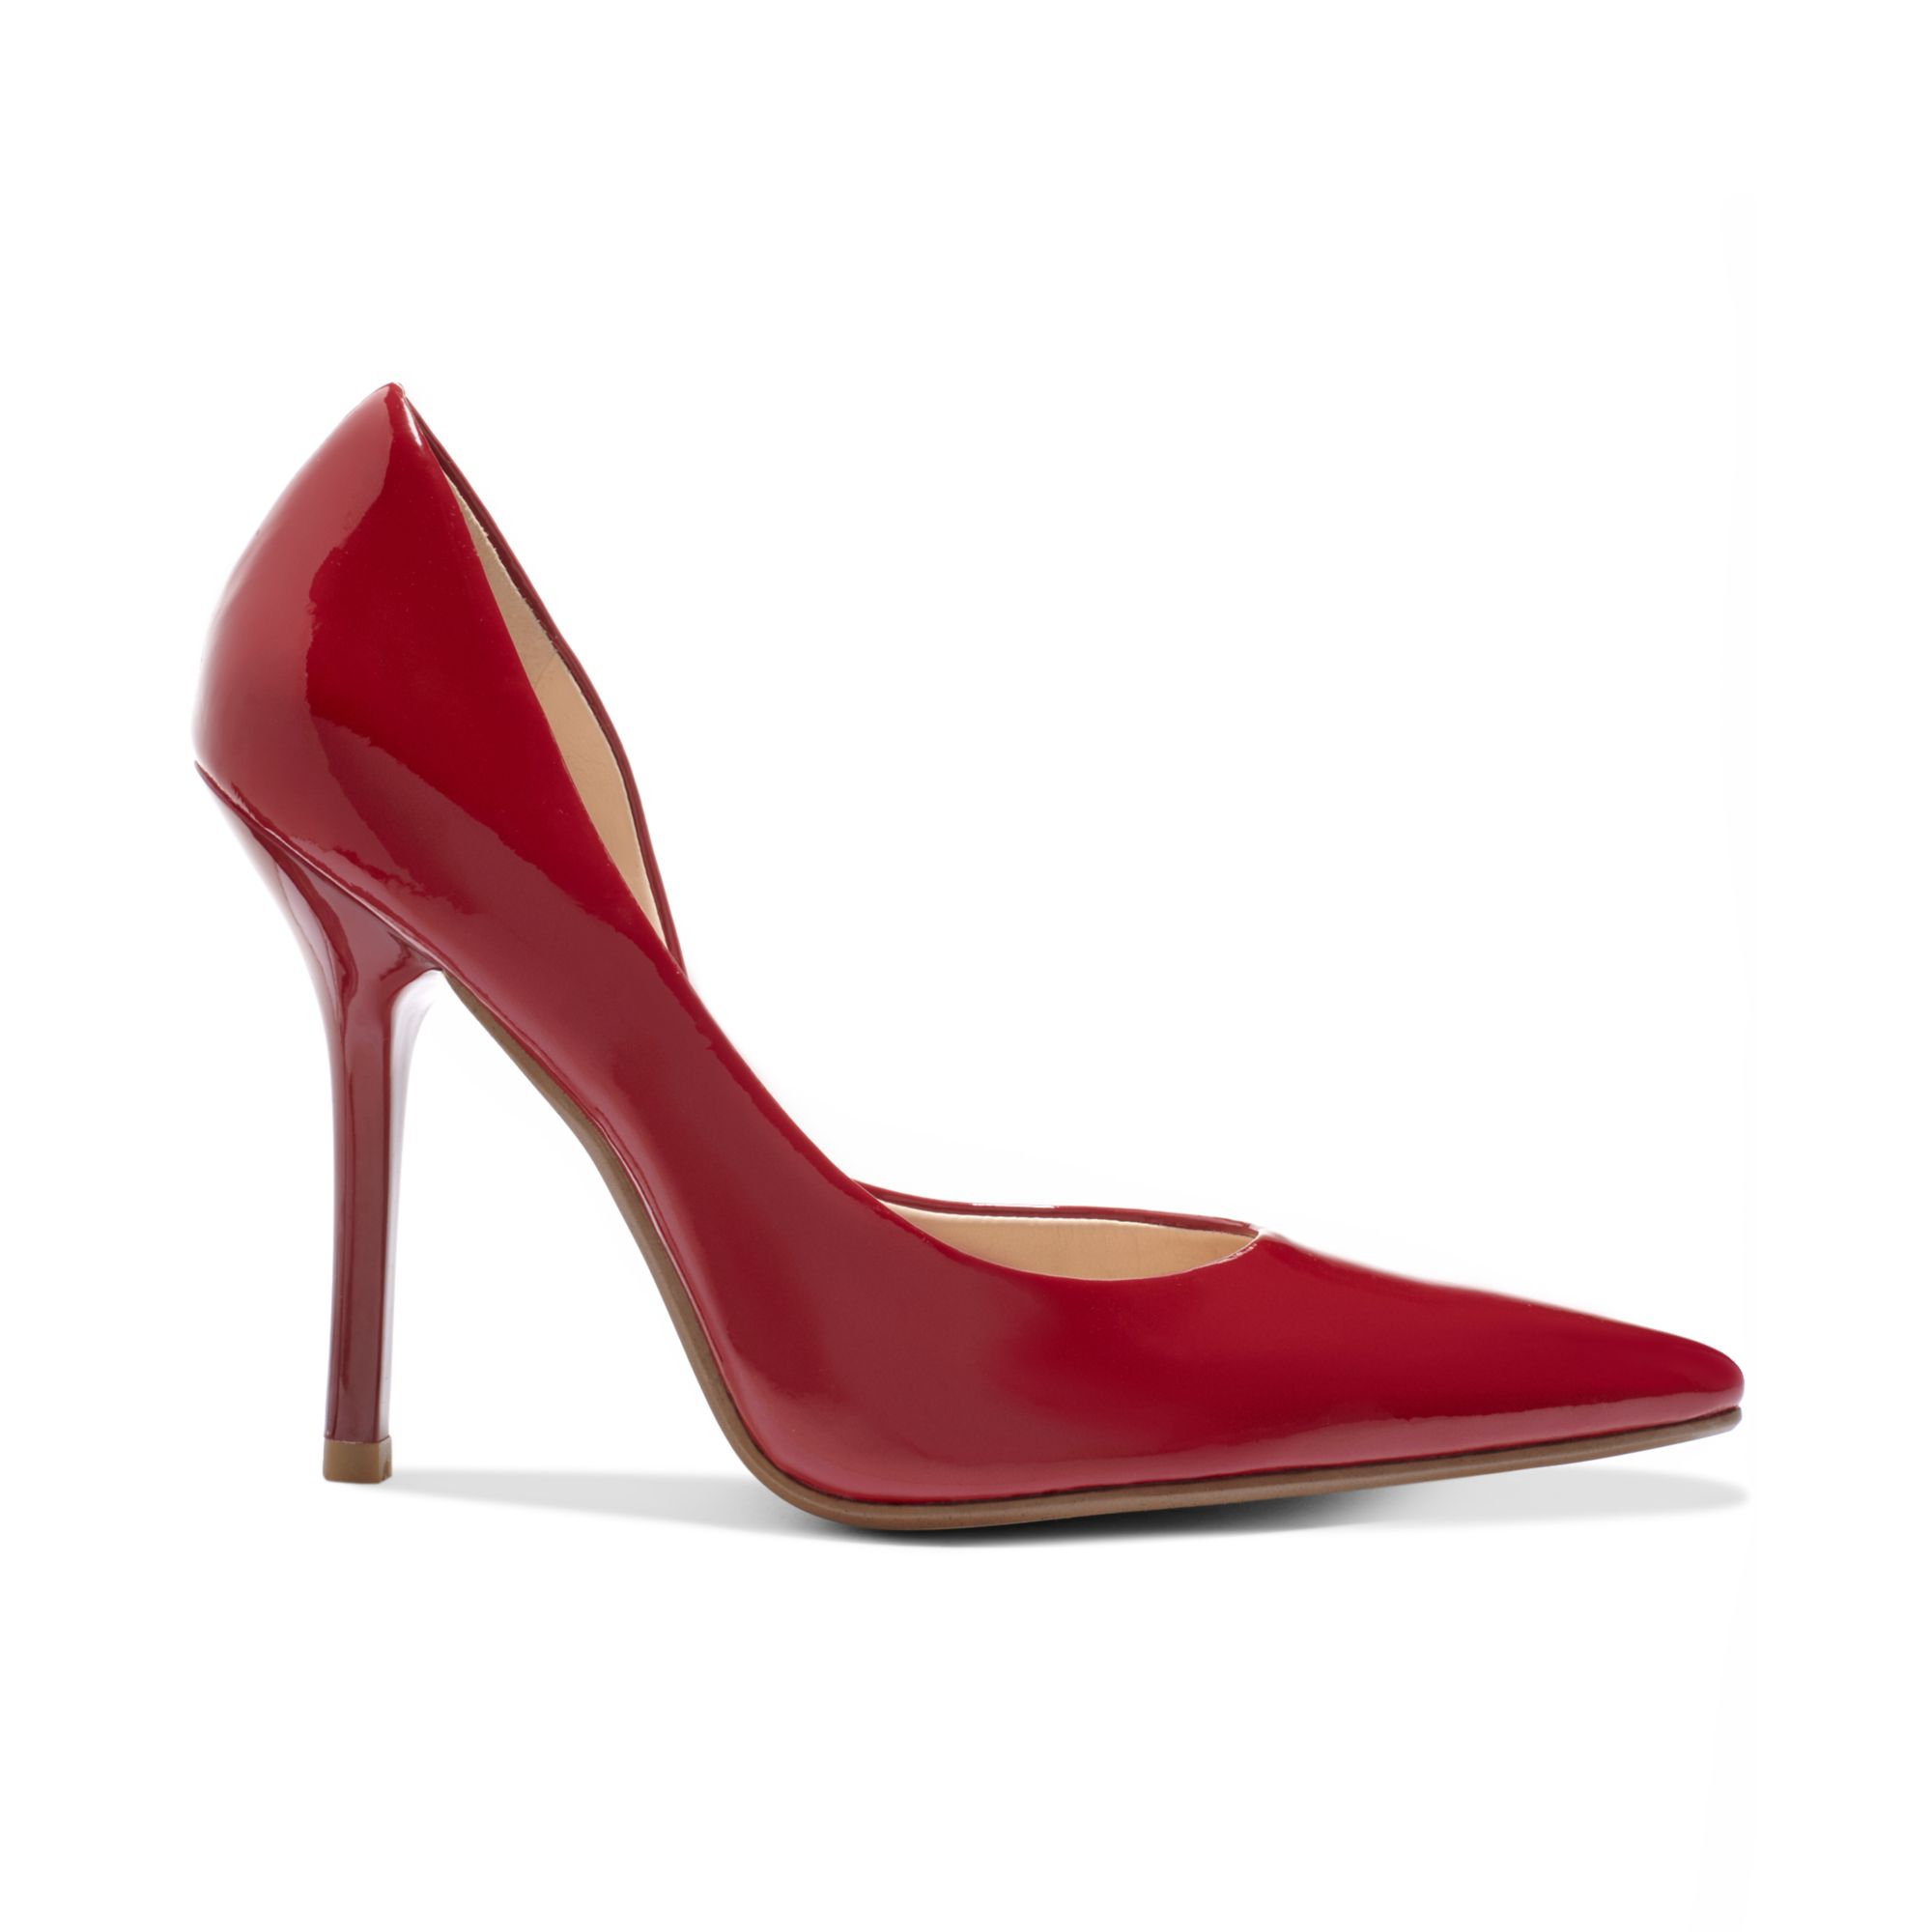 Guess Carrie Pumps in Red - Lyst